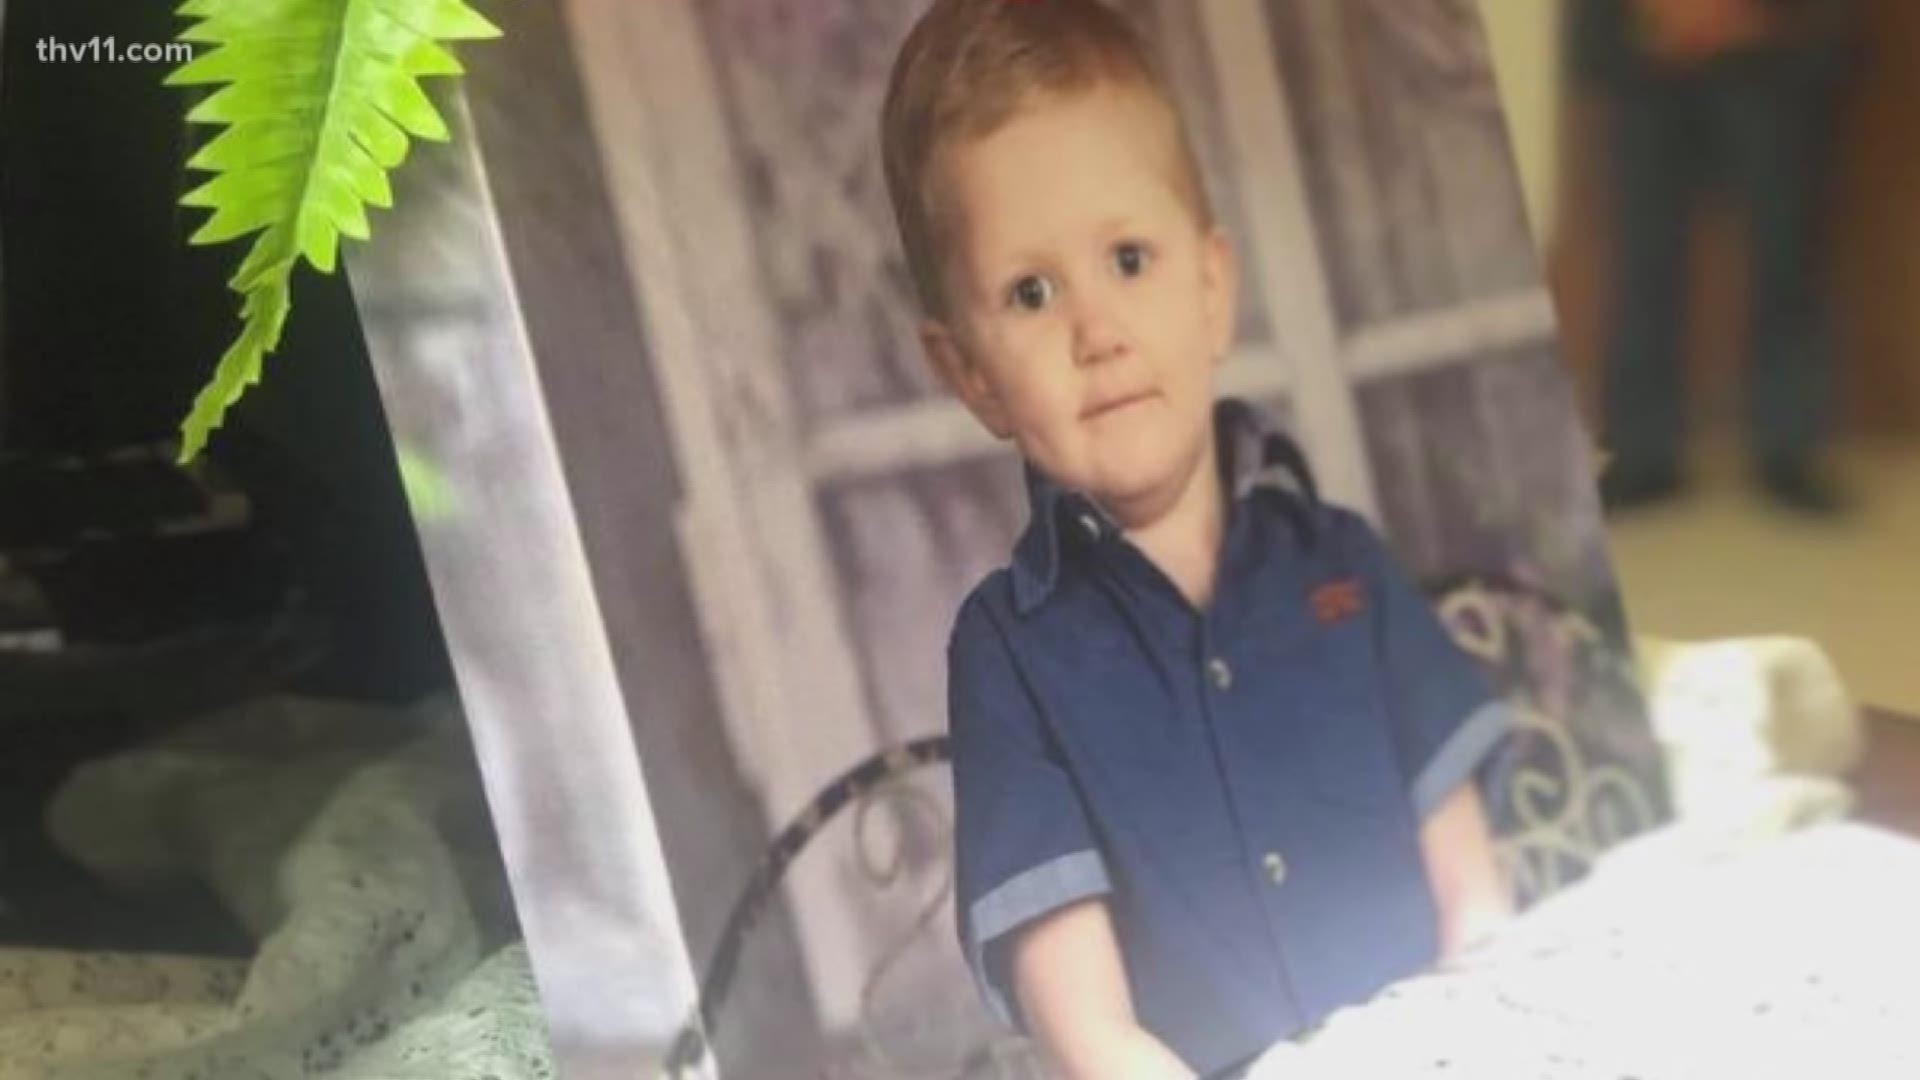 A mother's plead for help was heard all around the country. Military service members gathered to honor the battle that cost a little boy his life.